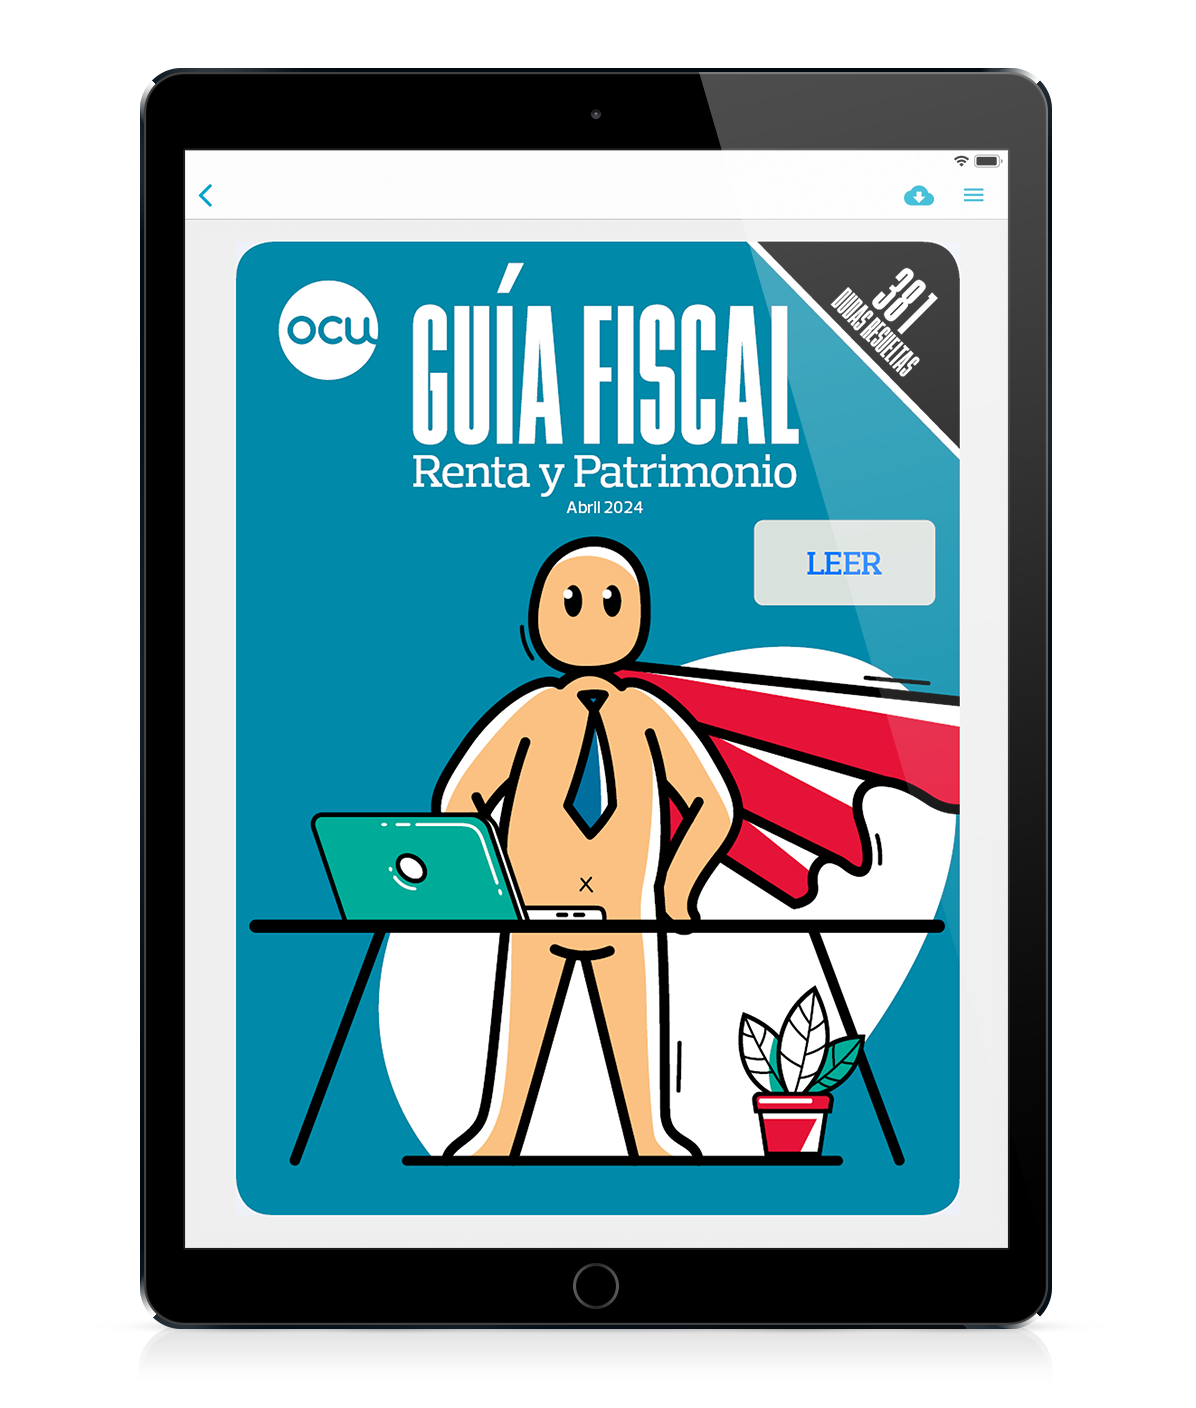 fiscal